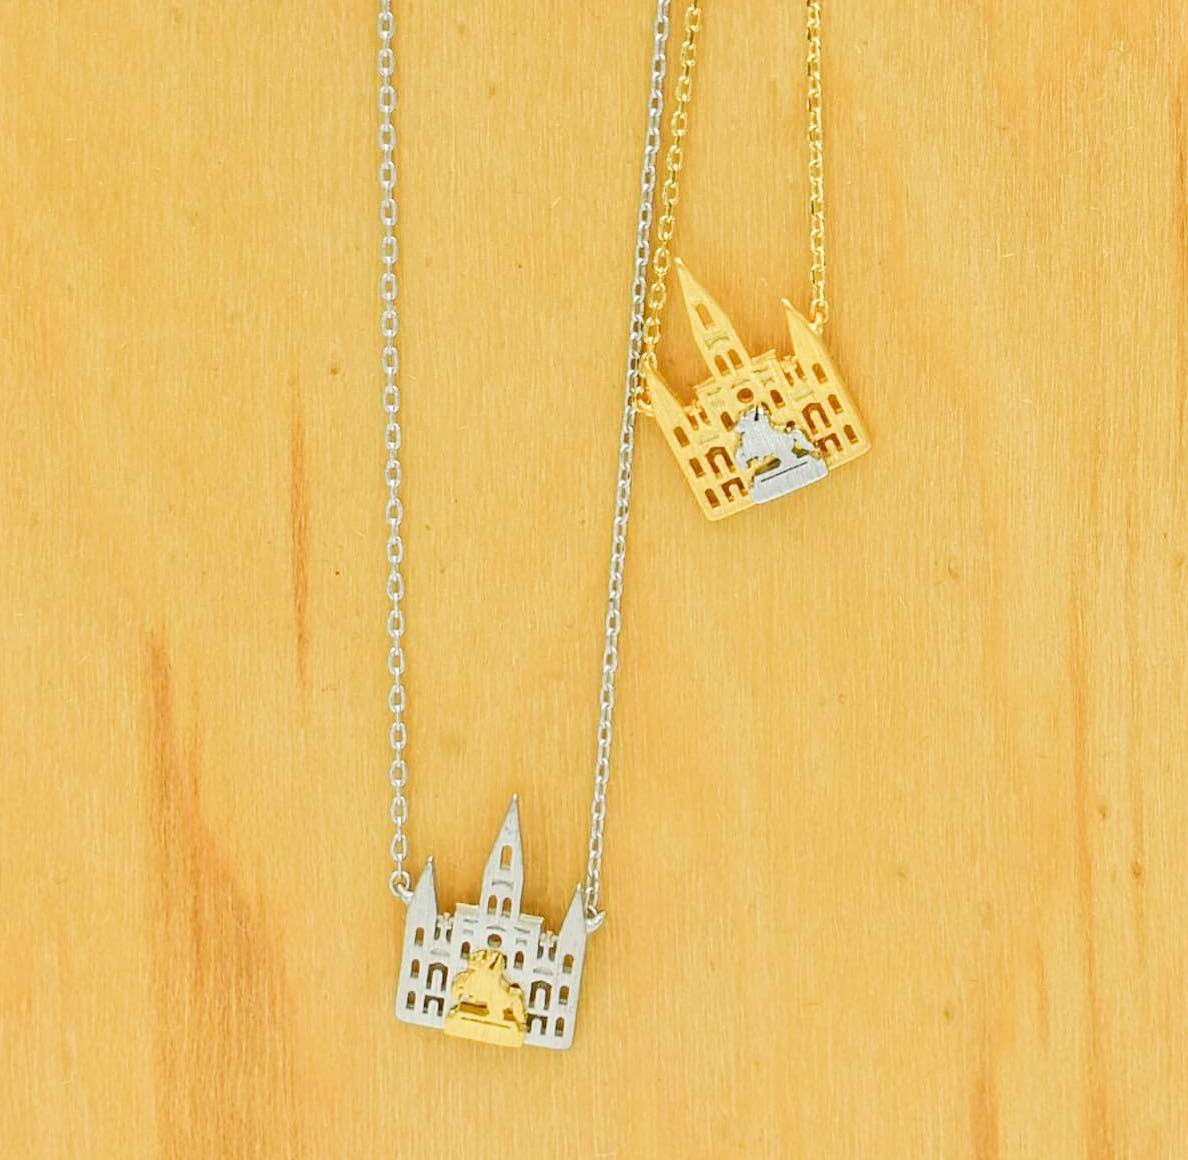 Cathedral Necklace